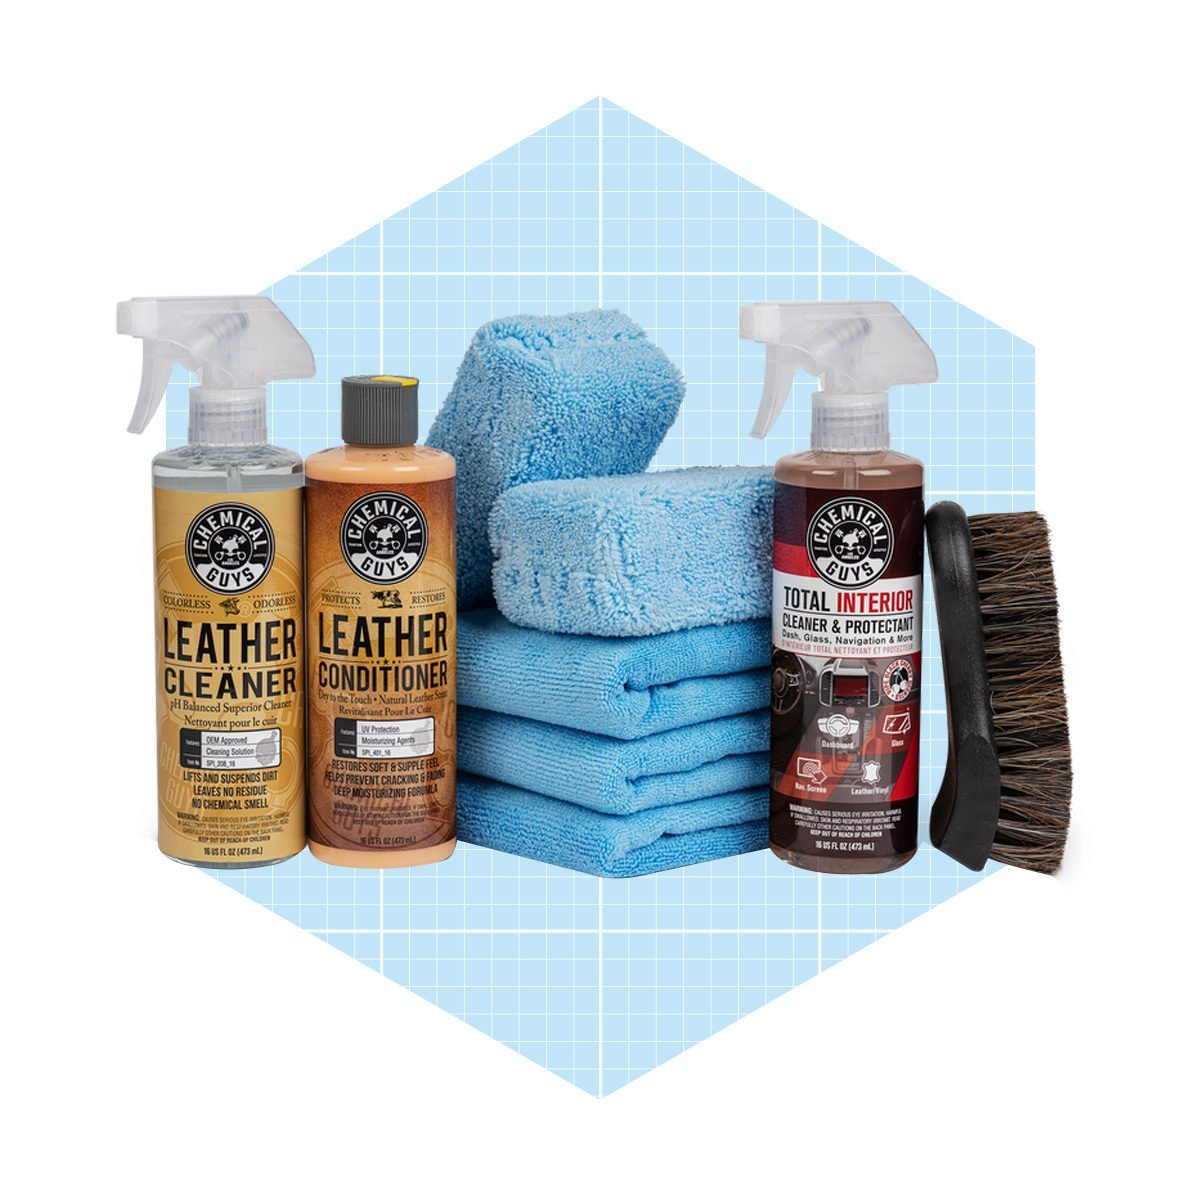 The All Leather & Interior Clean Kit Ecomm Chemicalguys